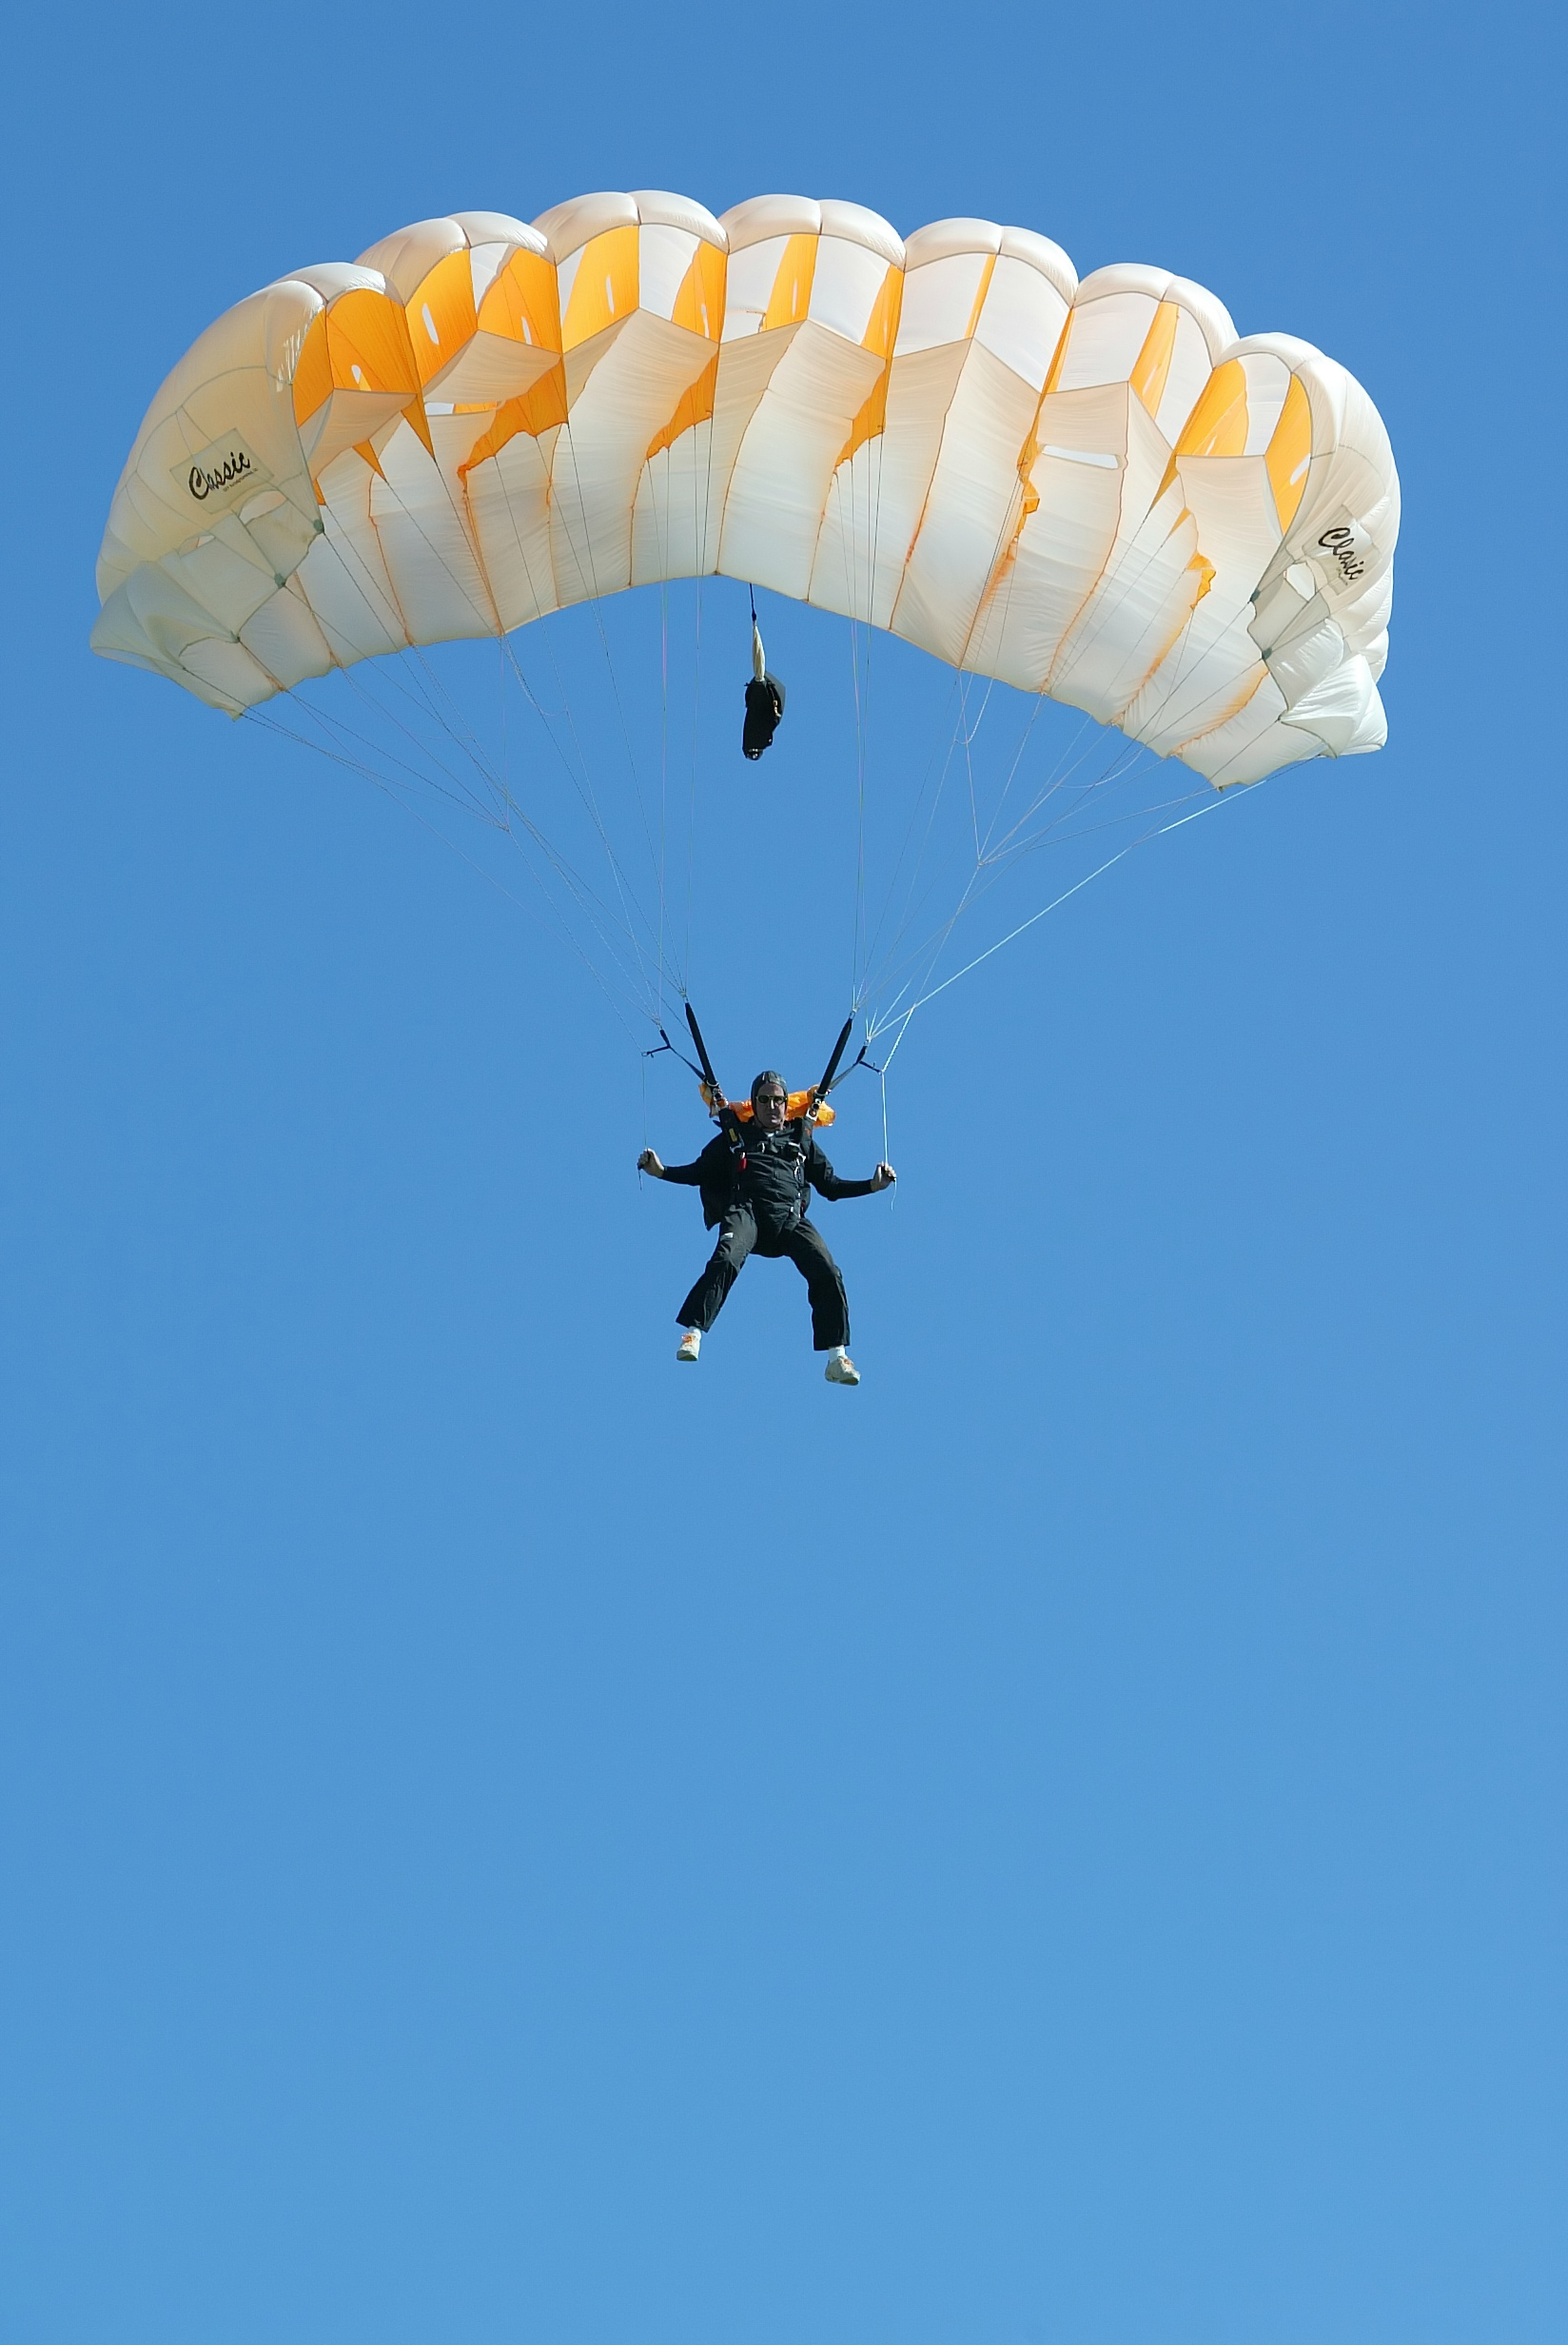 View from below of a person using a parachute